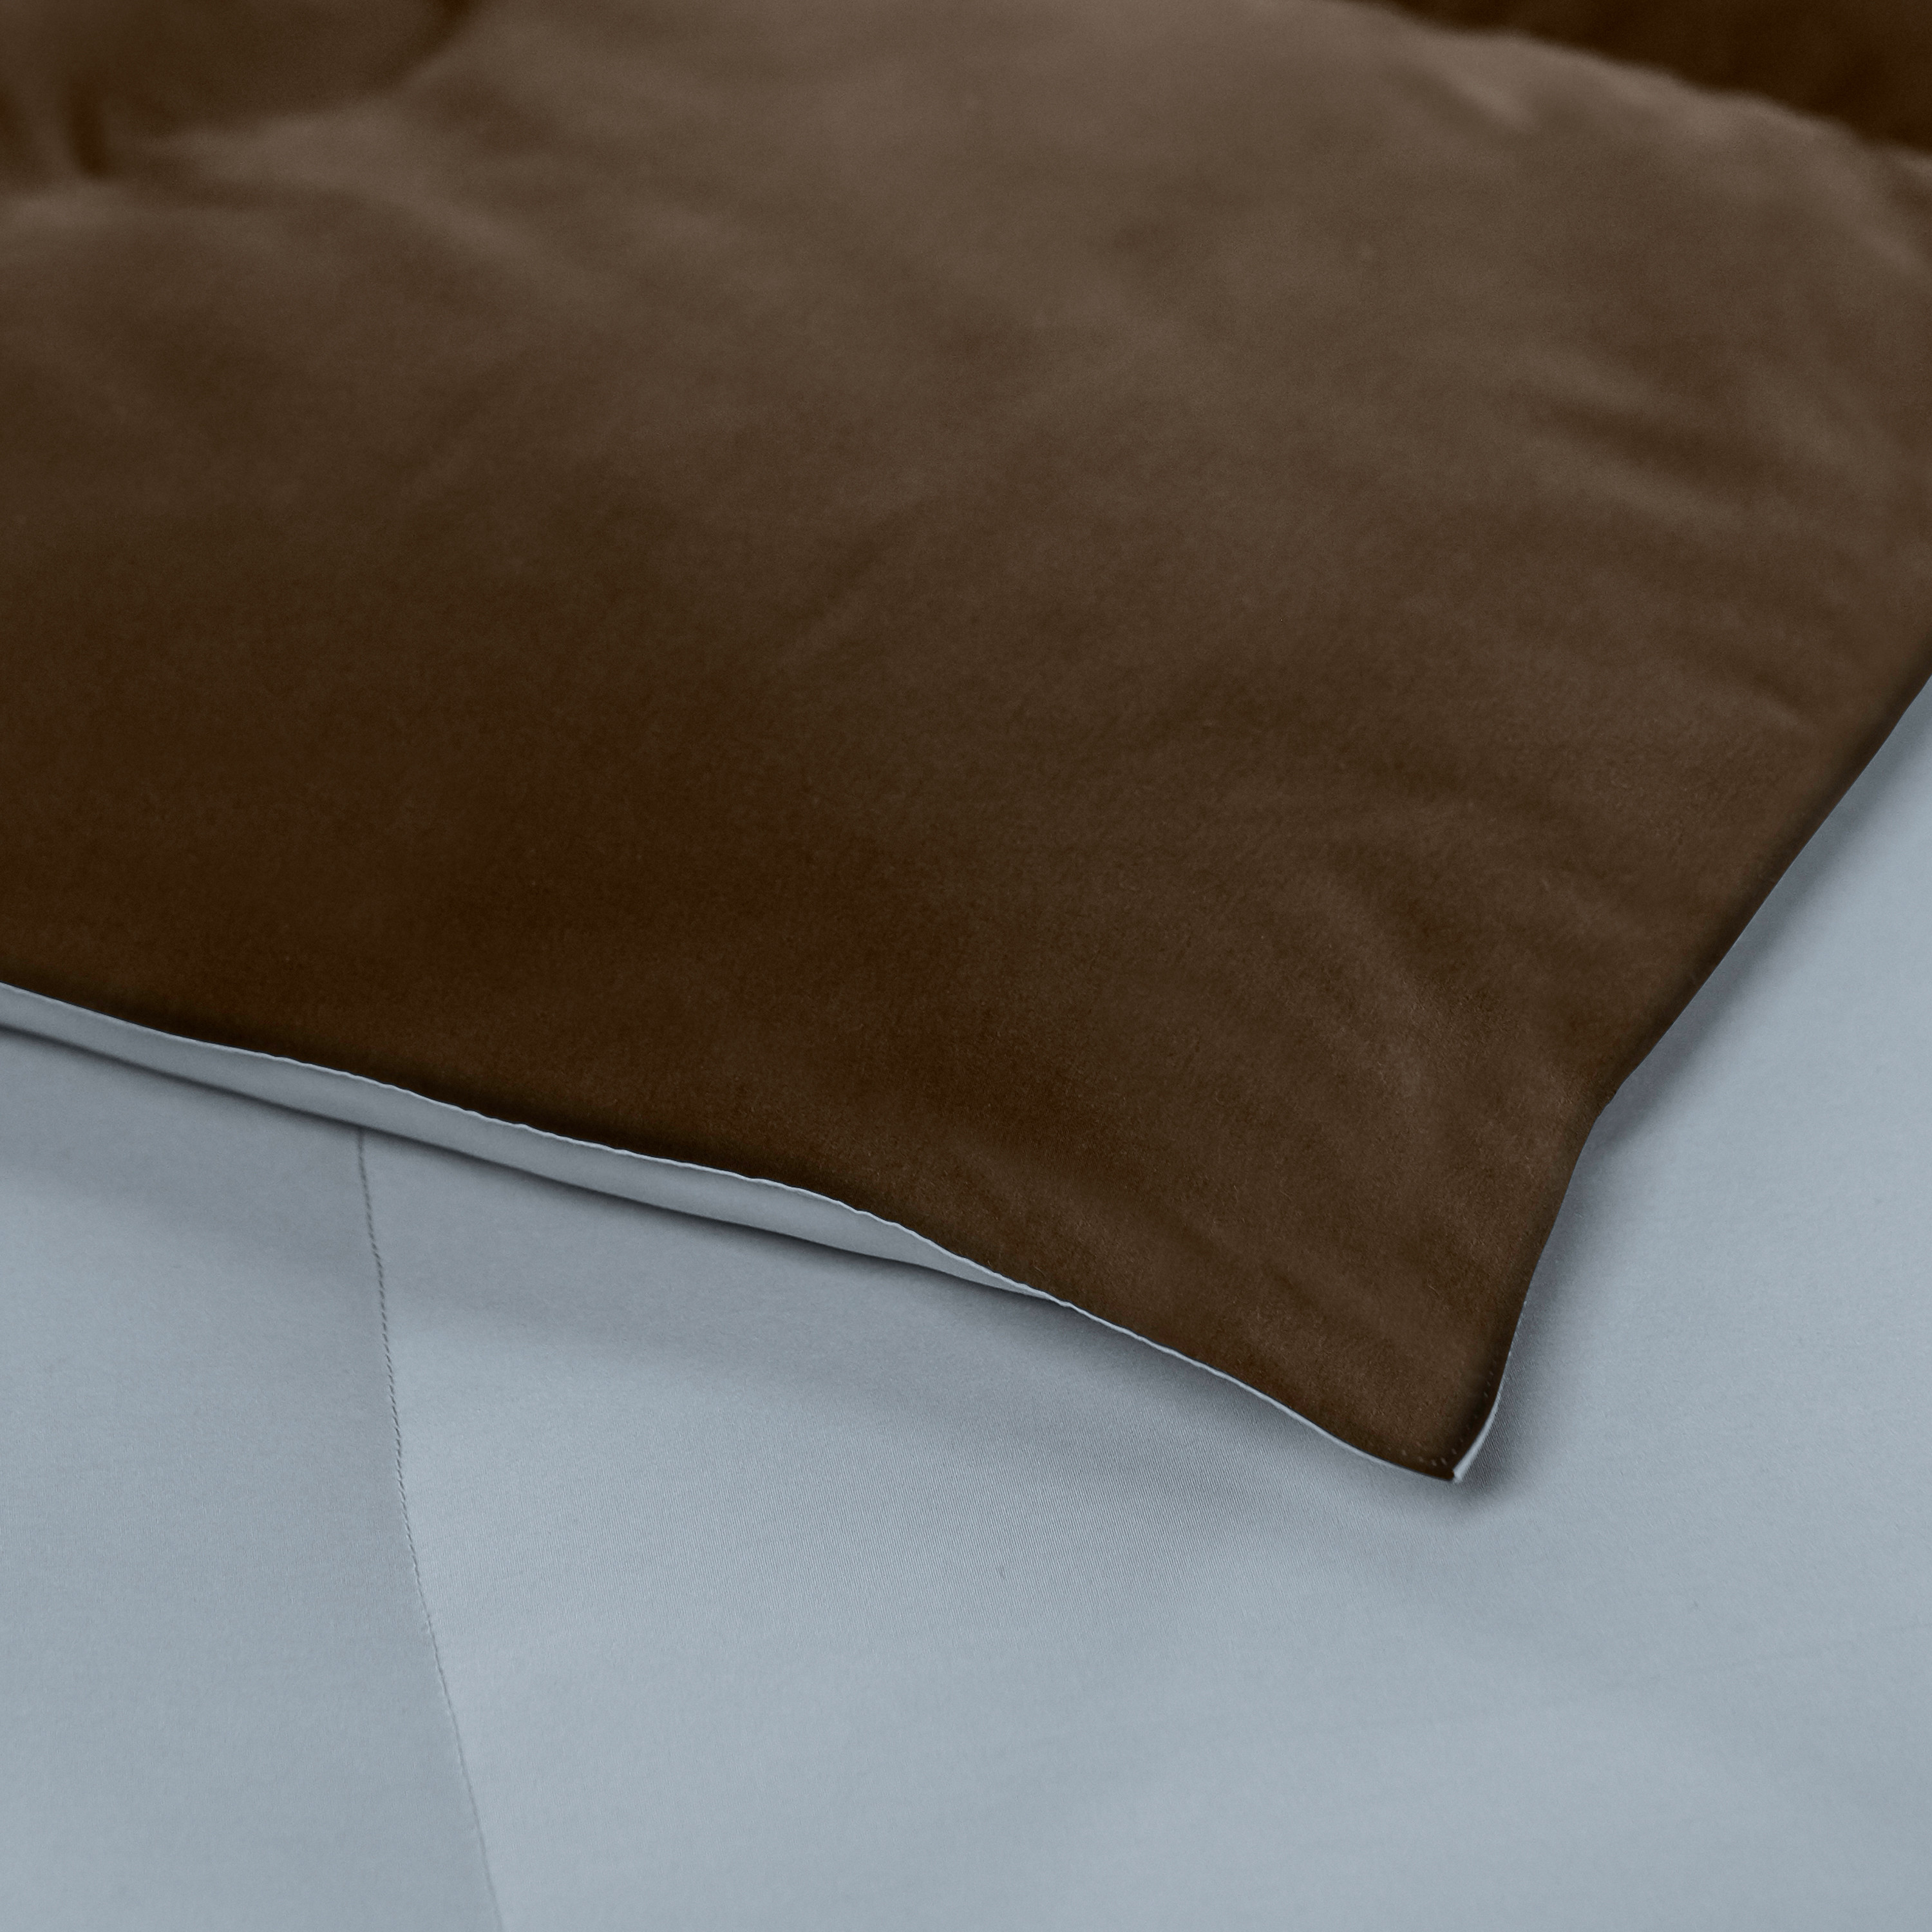 Dreamy Nights Reversible Down Comforter in Choice of Colors and Sizes - image 5 of 7